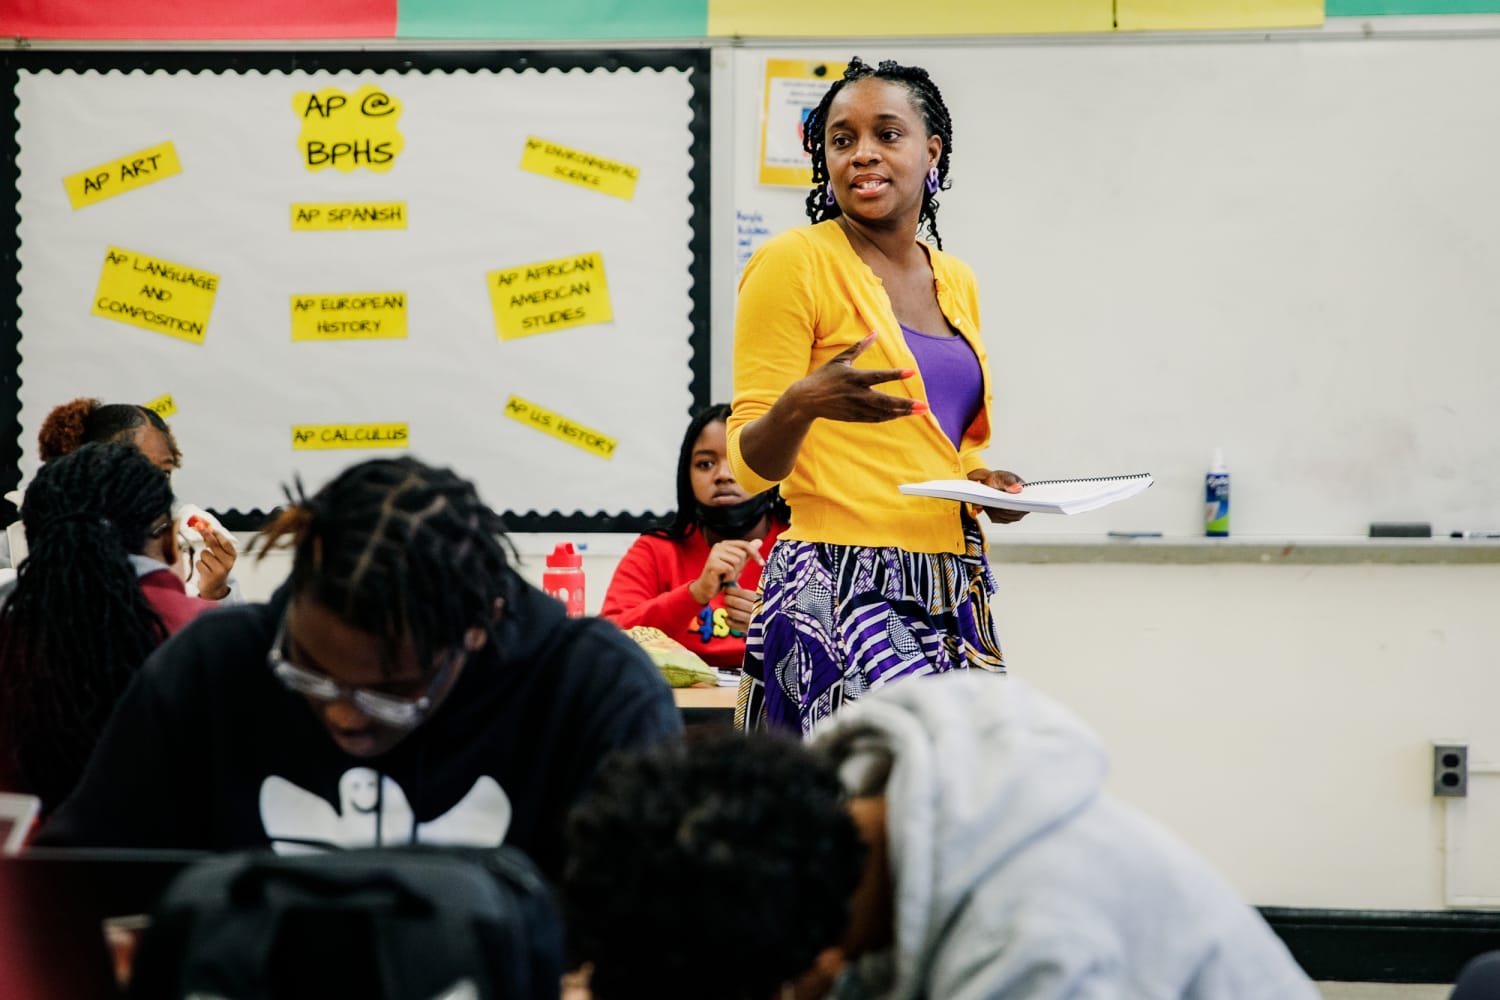 AP African American Studies course is a ‘game changer’ for the Brooklyn students who fought for it